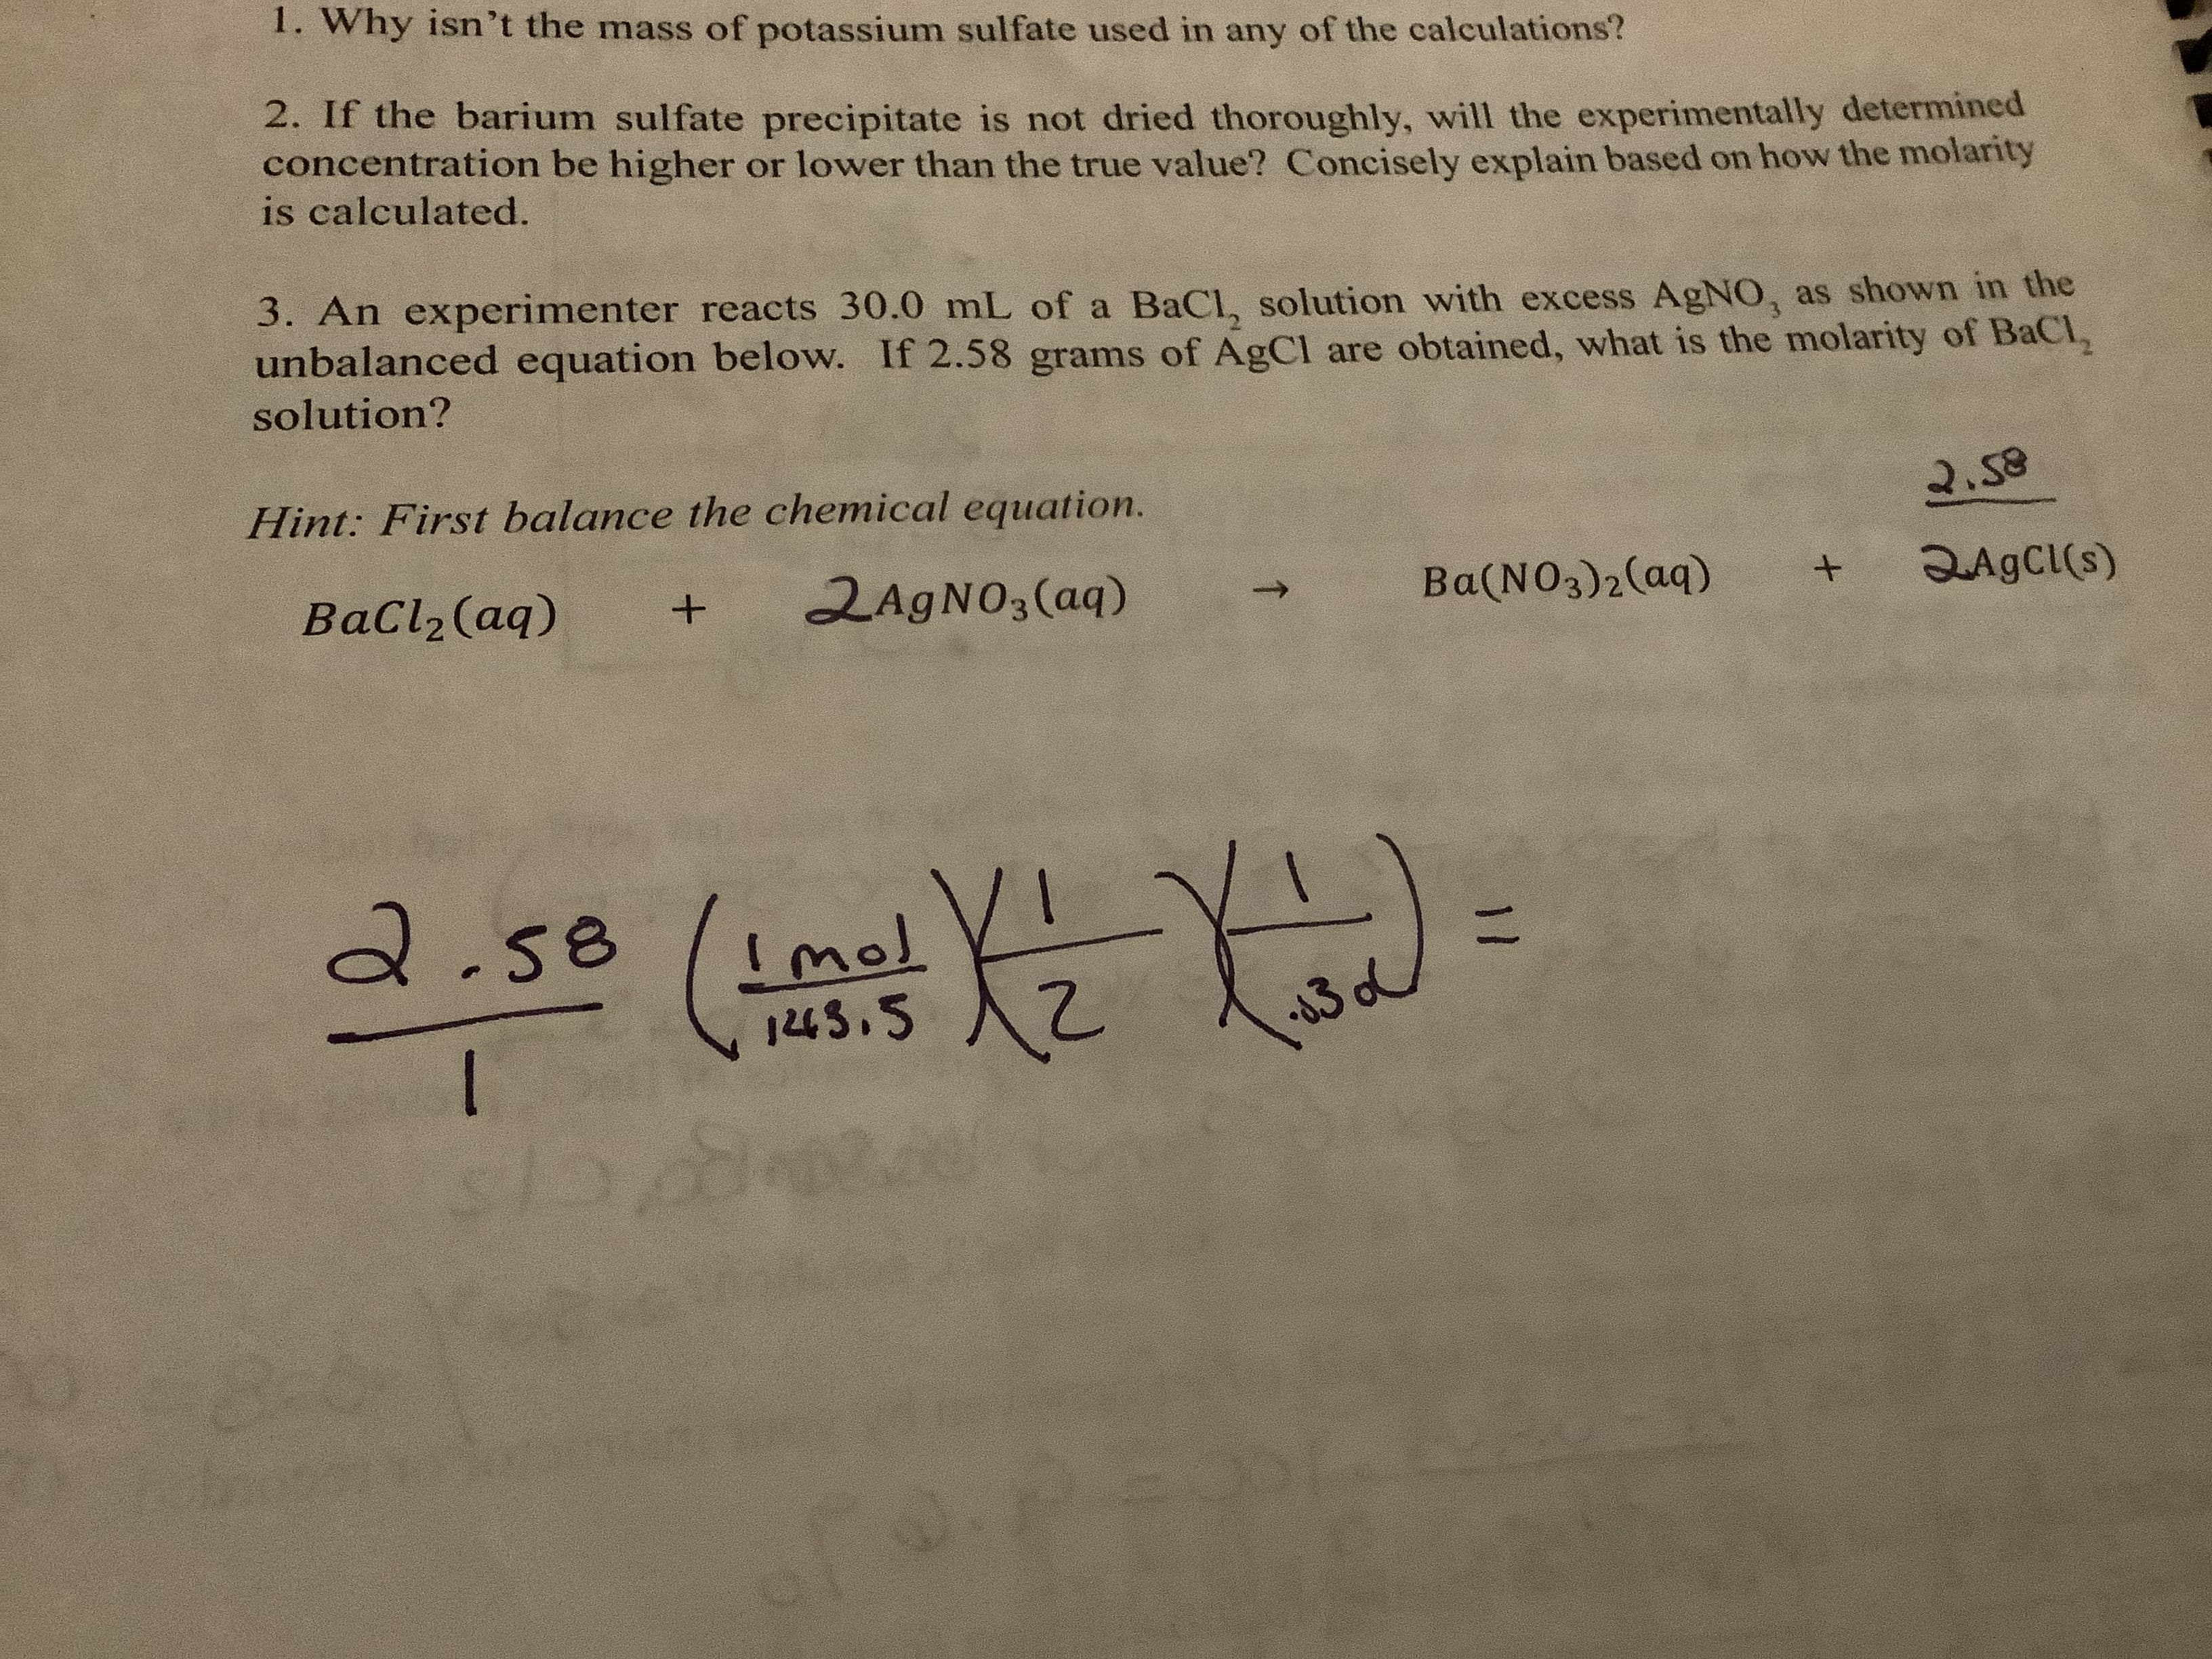 1. Why isn't the mass of potassium sulfate used in any of the calculations?
2. If the barium sulfate precipitate is not dried thoroughly, will the experimentally determined
concentration be higher or lower than the true value? Concisely explain based on how the molarity
is calculated.
3. An experimenter reacts 30.0 mL of a BaCl, solution with excess AgNO, as shown in the
unbalanced equation below. If 2.58 grams of AgCl are obtained, what is the molarity of BaCl
solution?
Hint: First balance the chemical equation.
2.S8
2AGNO3(aq)
BaCl2 (aq)
QAGCI(s)
Ba(NO3)2(aq)
a.se
Imol
1243,5
I
07.
00
T
